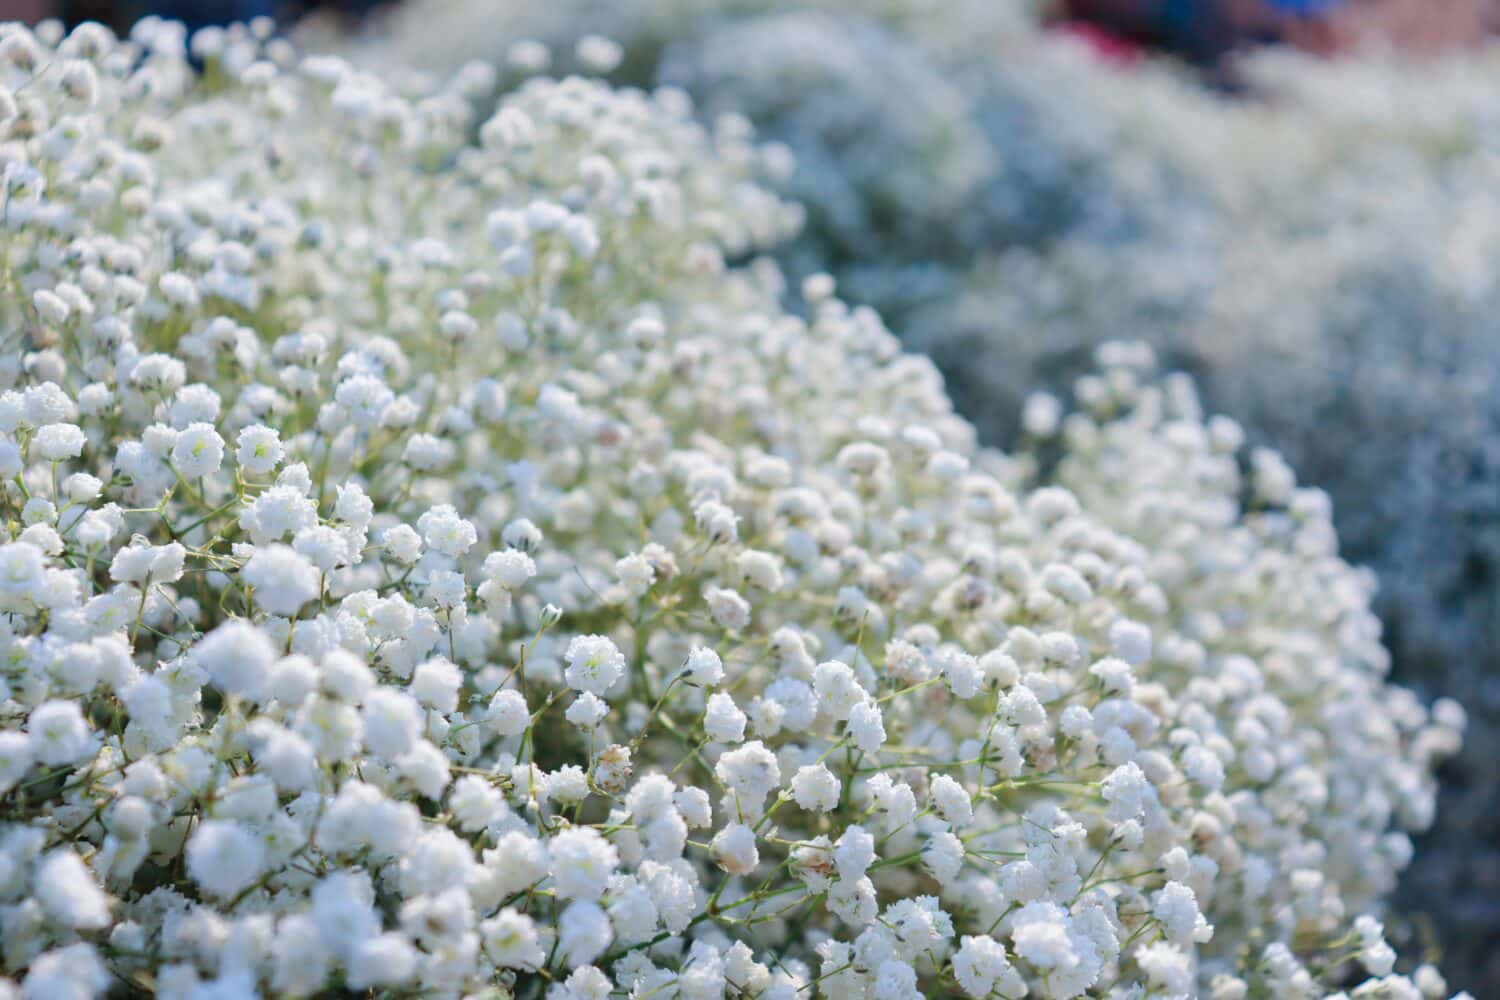 How to Grow and Care for Baby's Breath